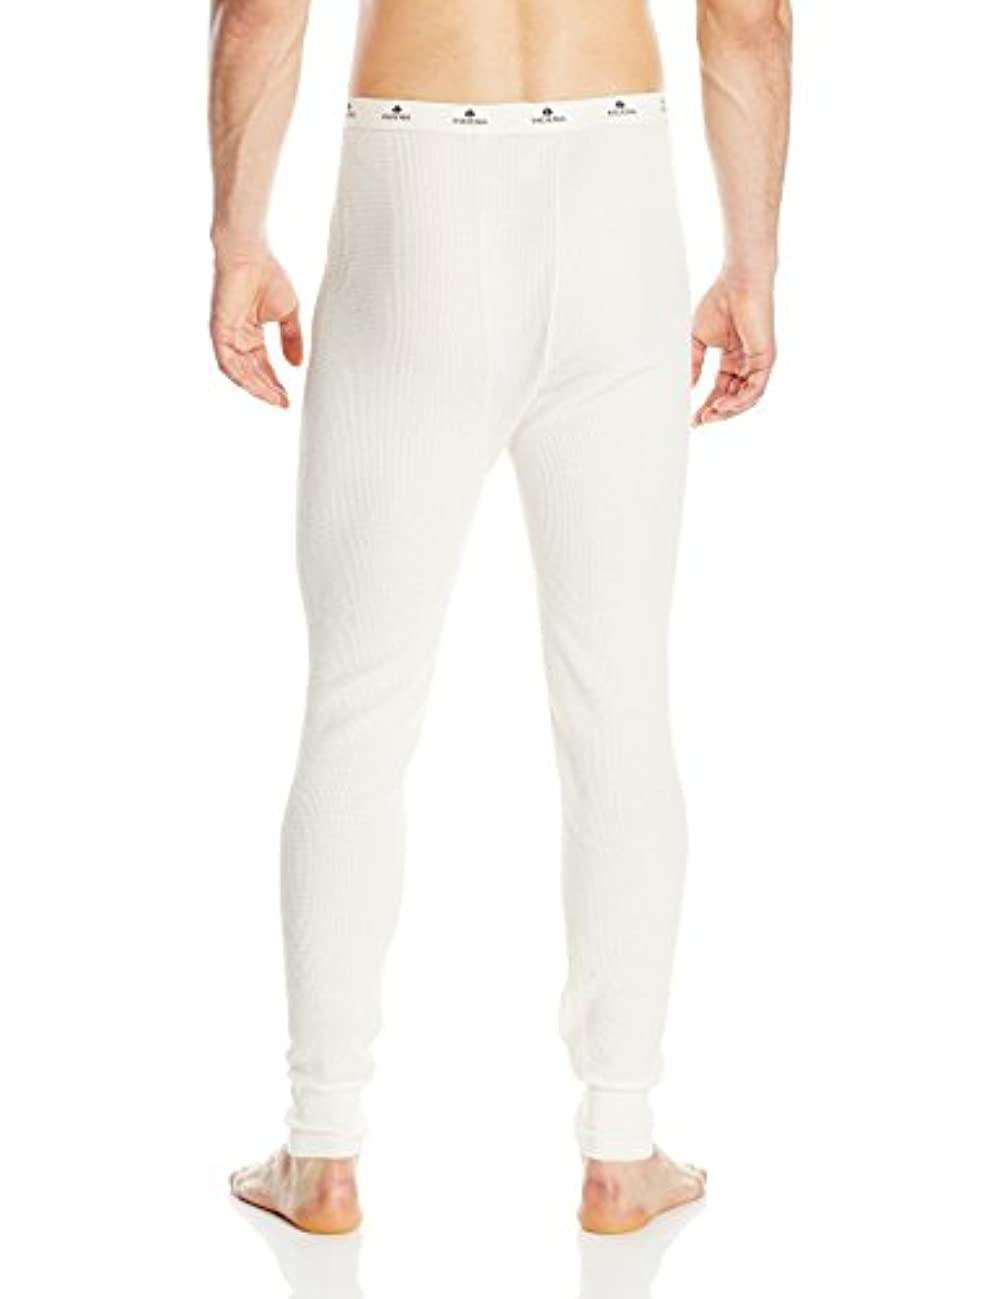 Men's Traditional Long Johns Pants Cotton Polyester Thermals 4XL Natural 